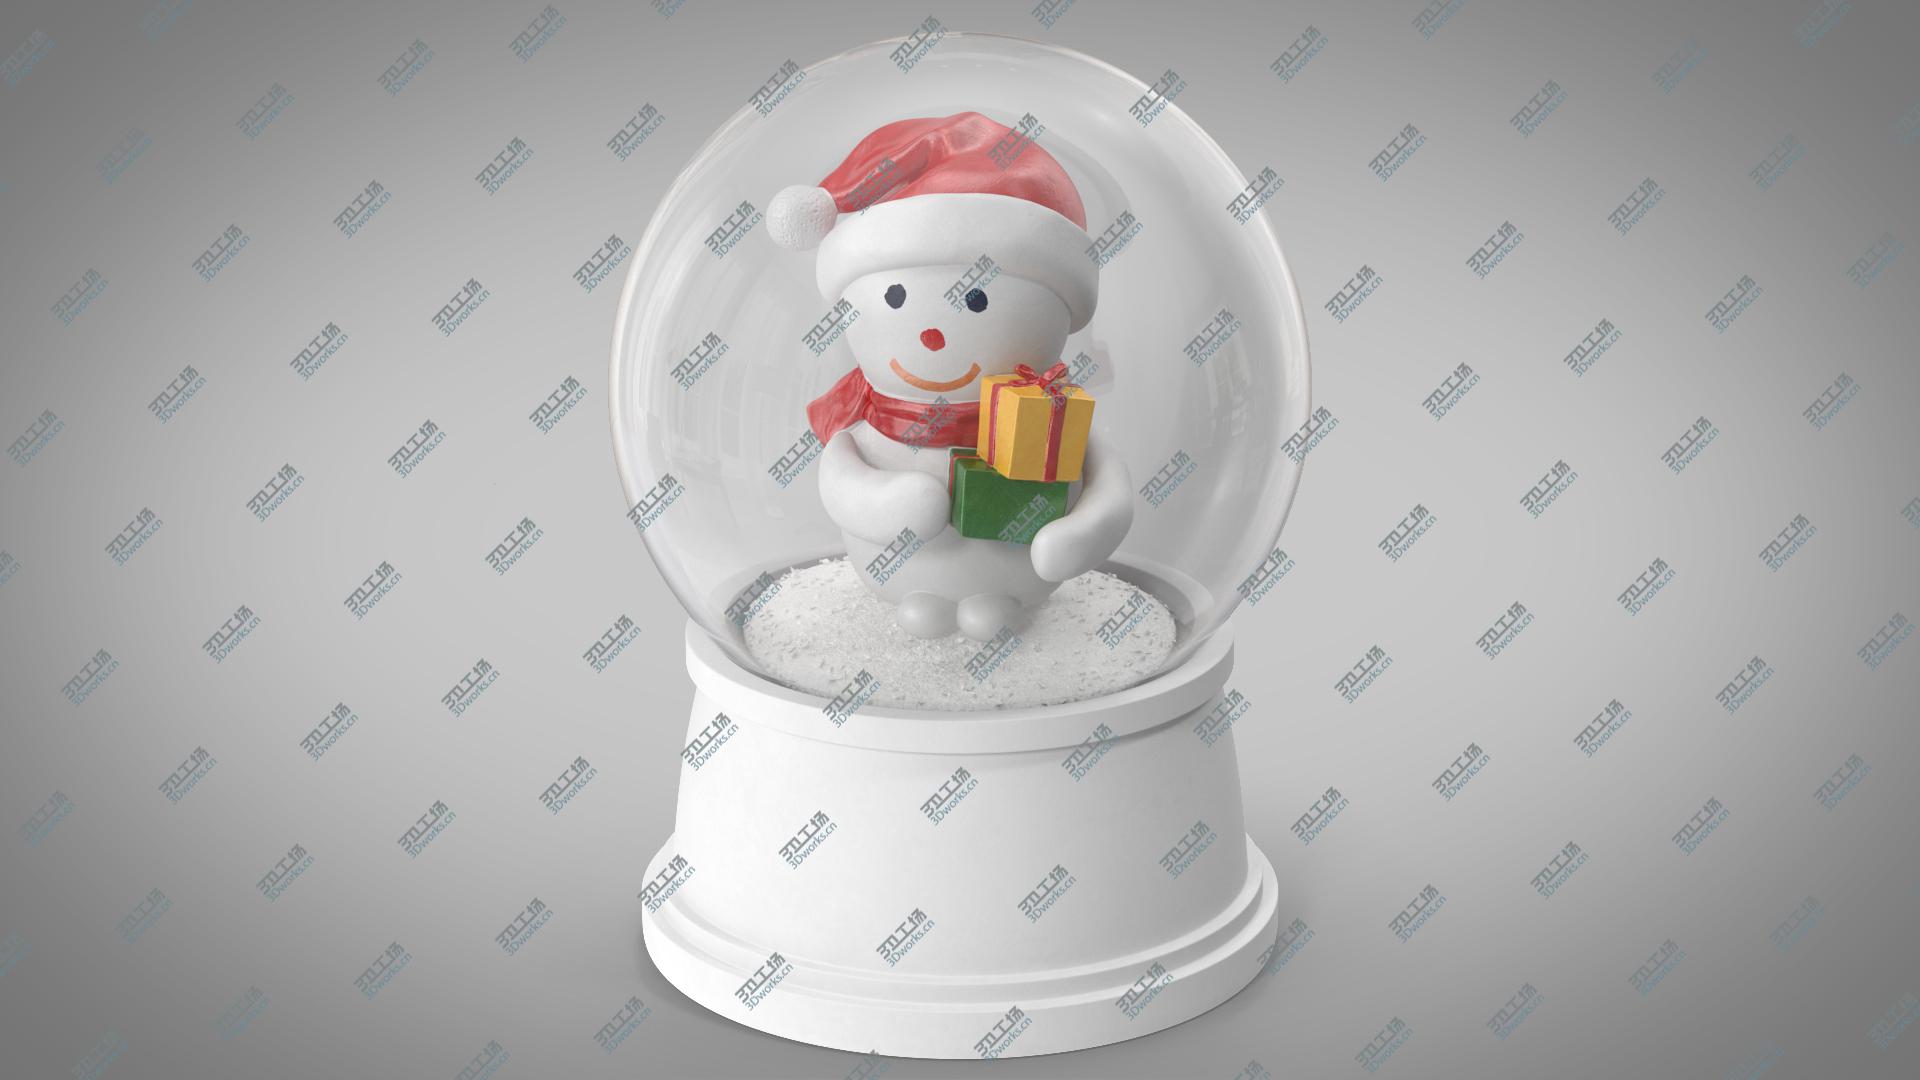 images/goods_img/2021040161/3D Snow Globe with a Snowman 5/2.jpg